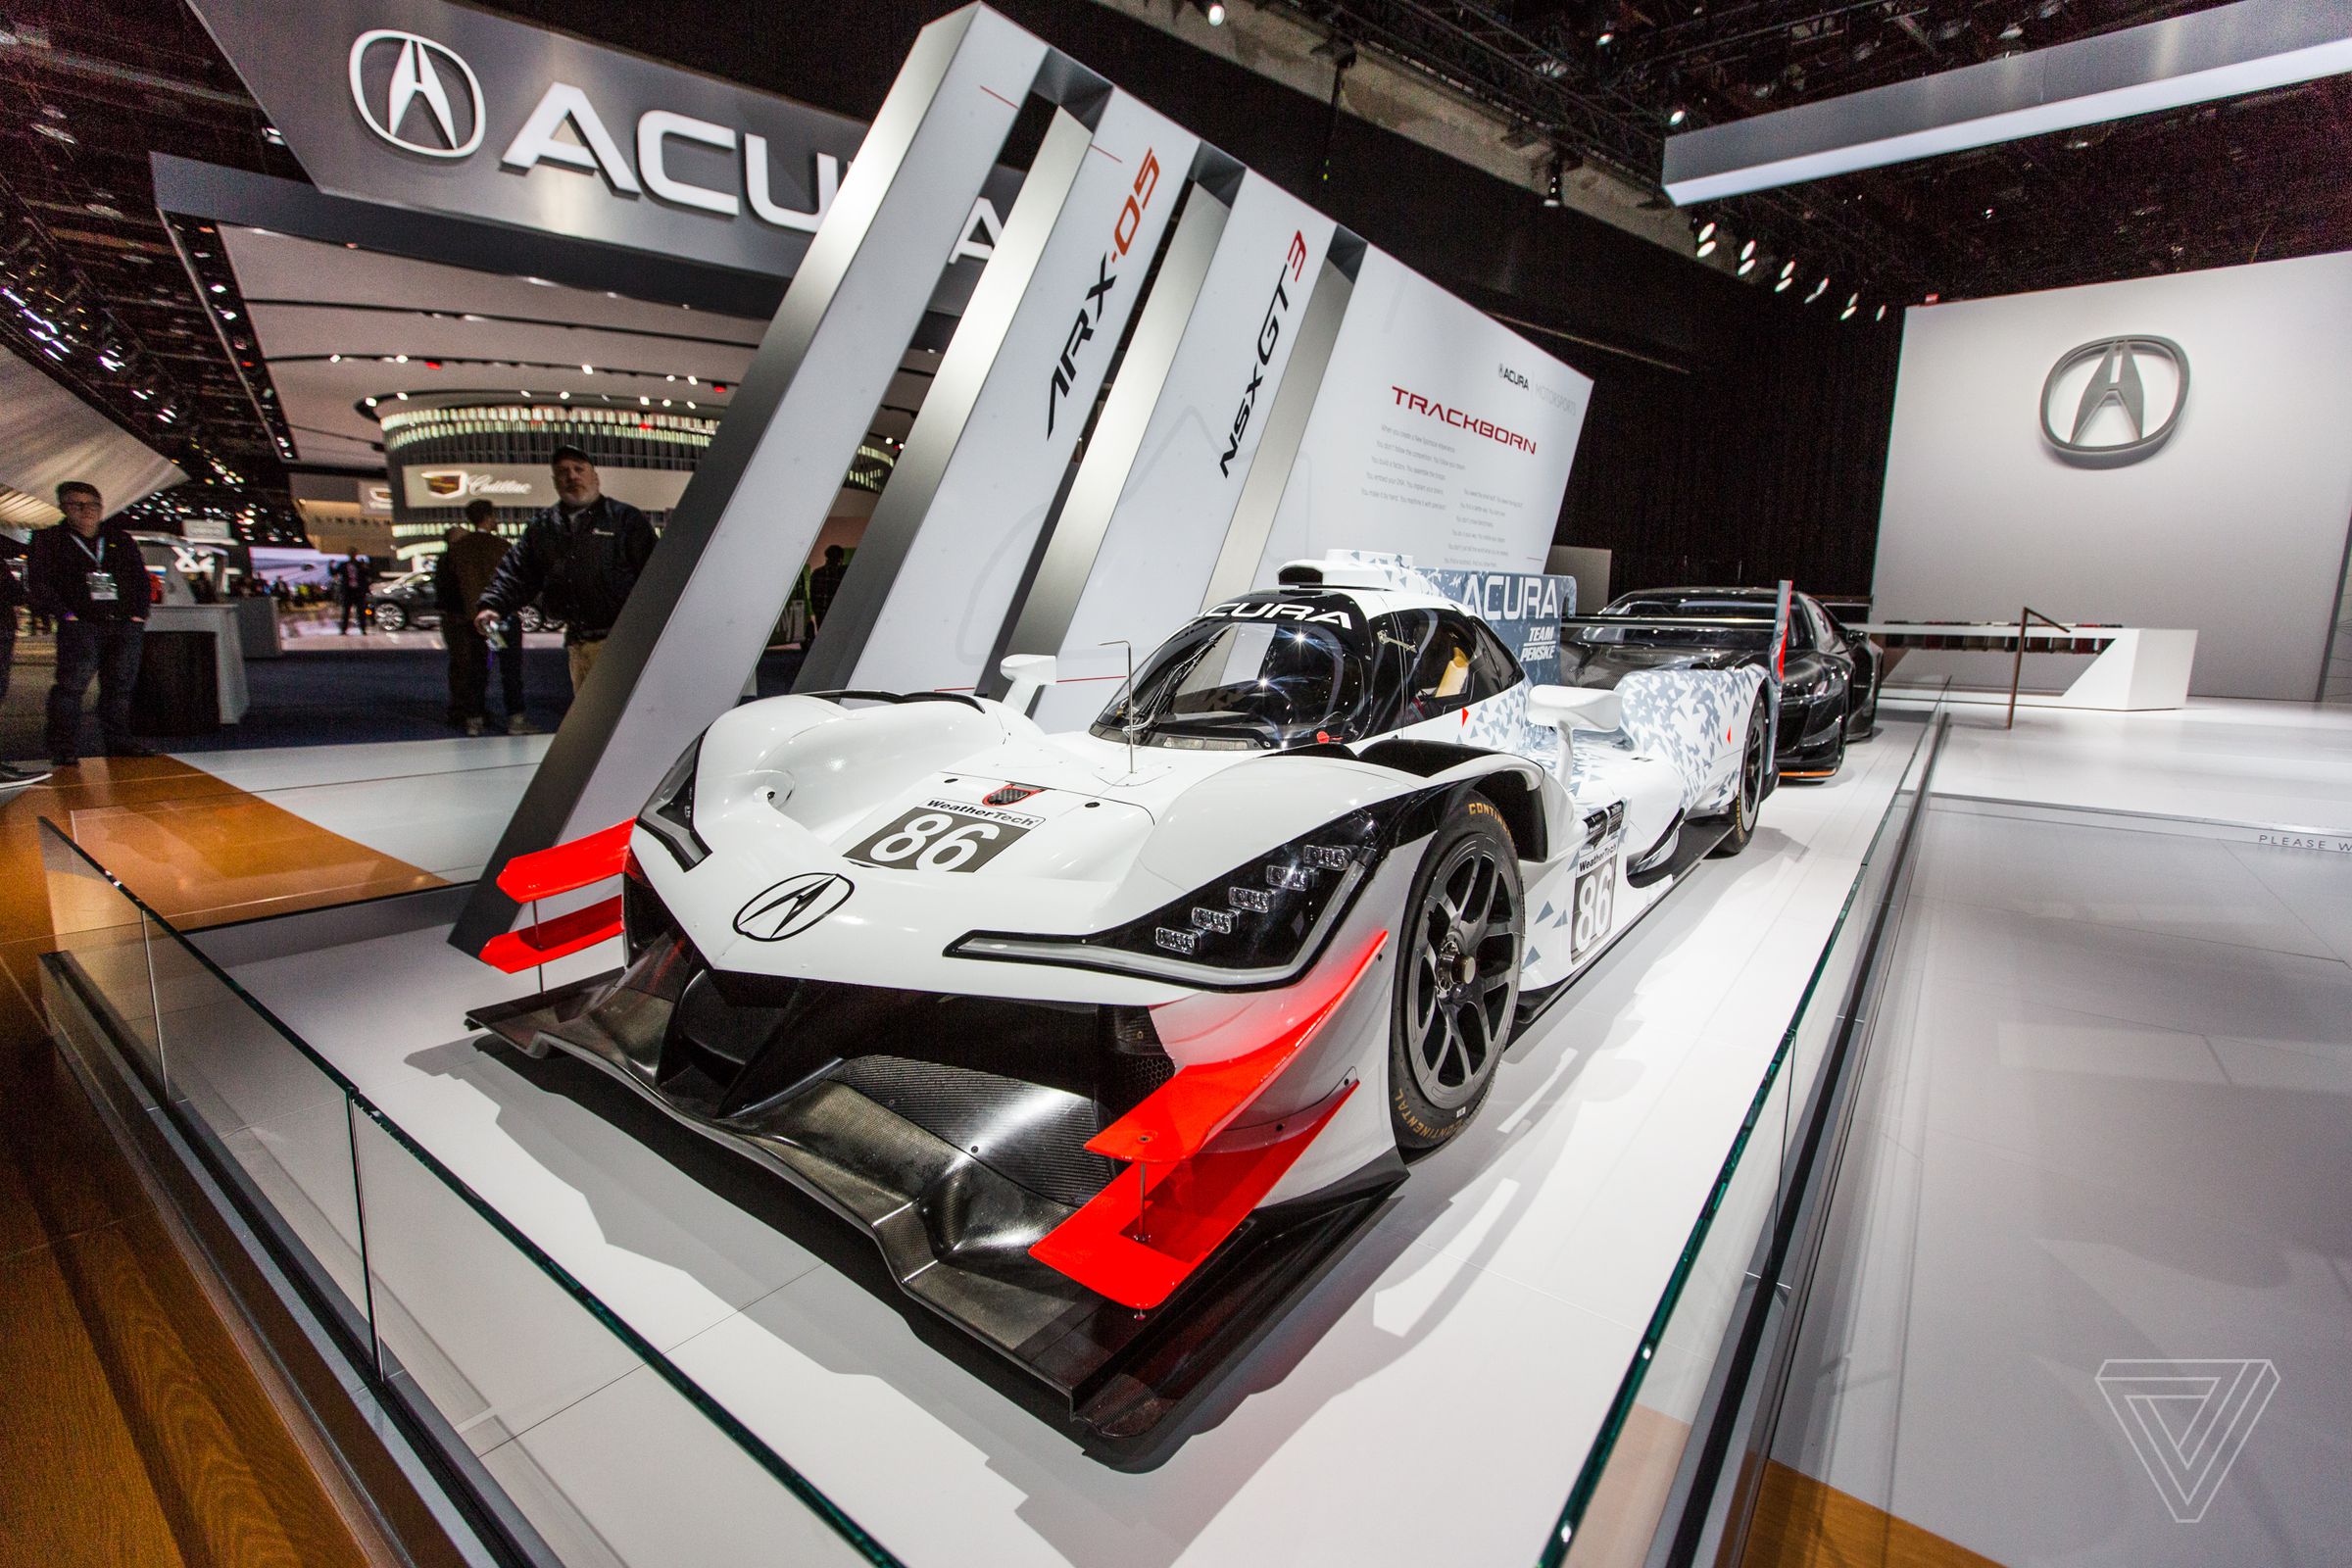 Meanwhile, Acura showed off the ARX-05 prototype racecar. This car was announced mid 2017 and signaled Acura’s return to prototype racing after years away from the sport.